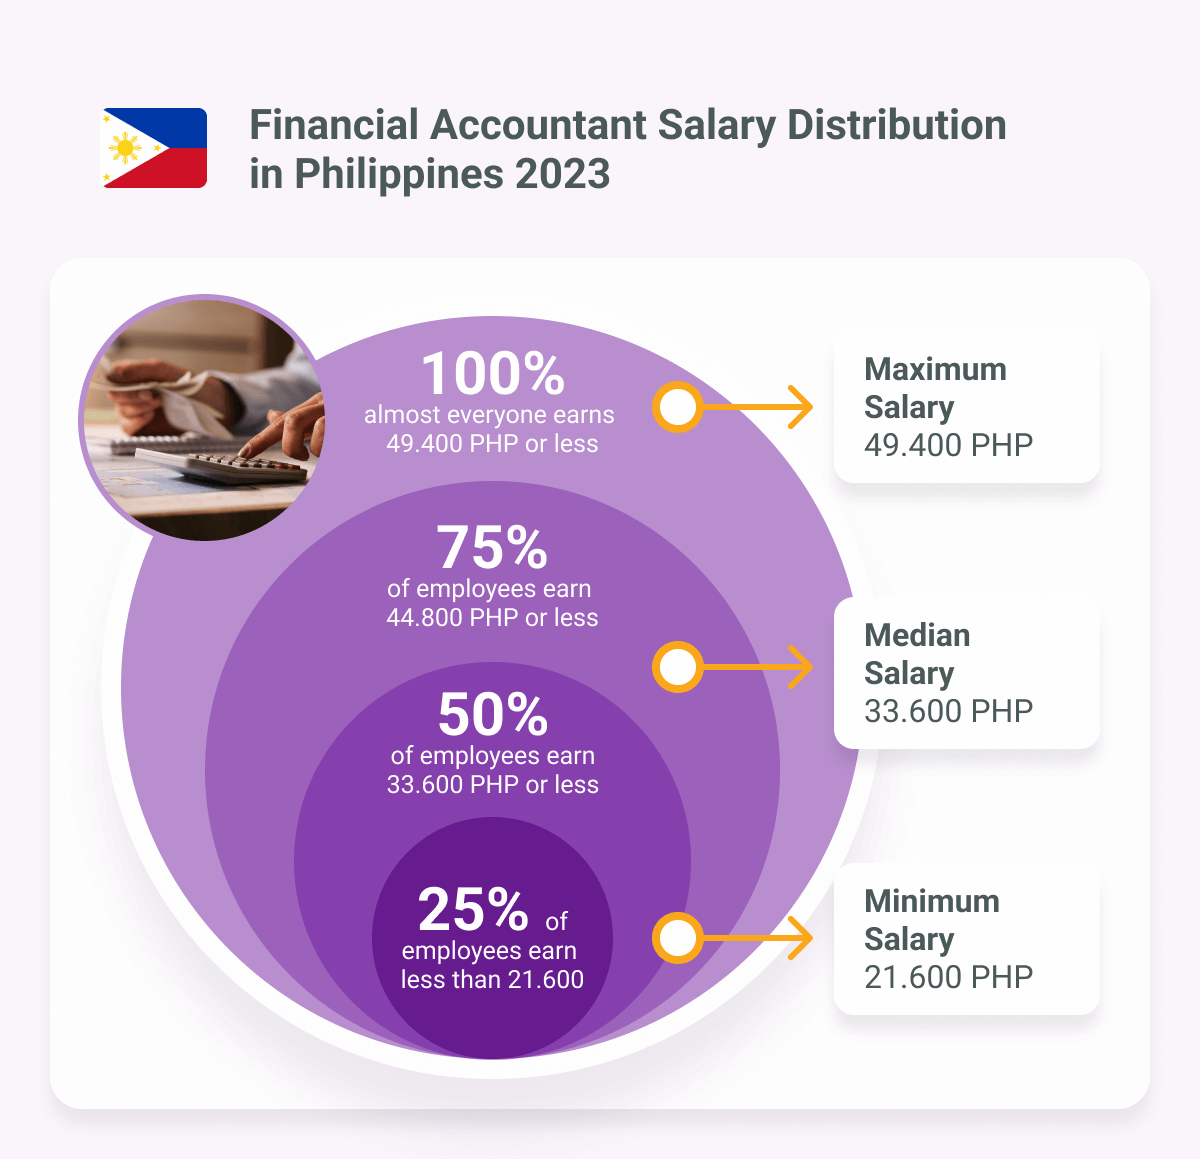 Accounant salary in the Philippines